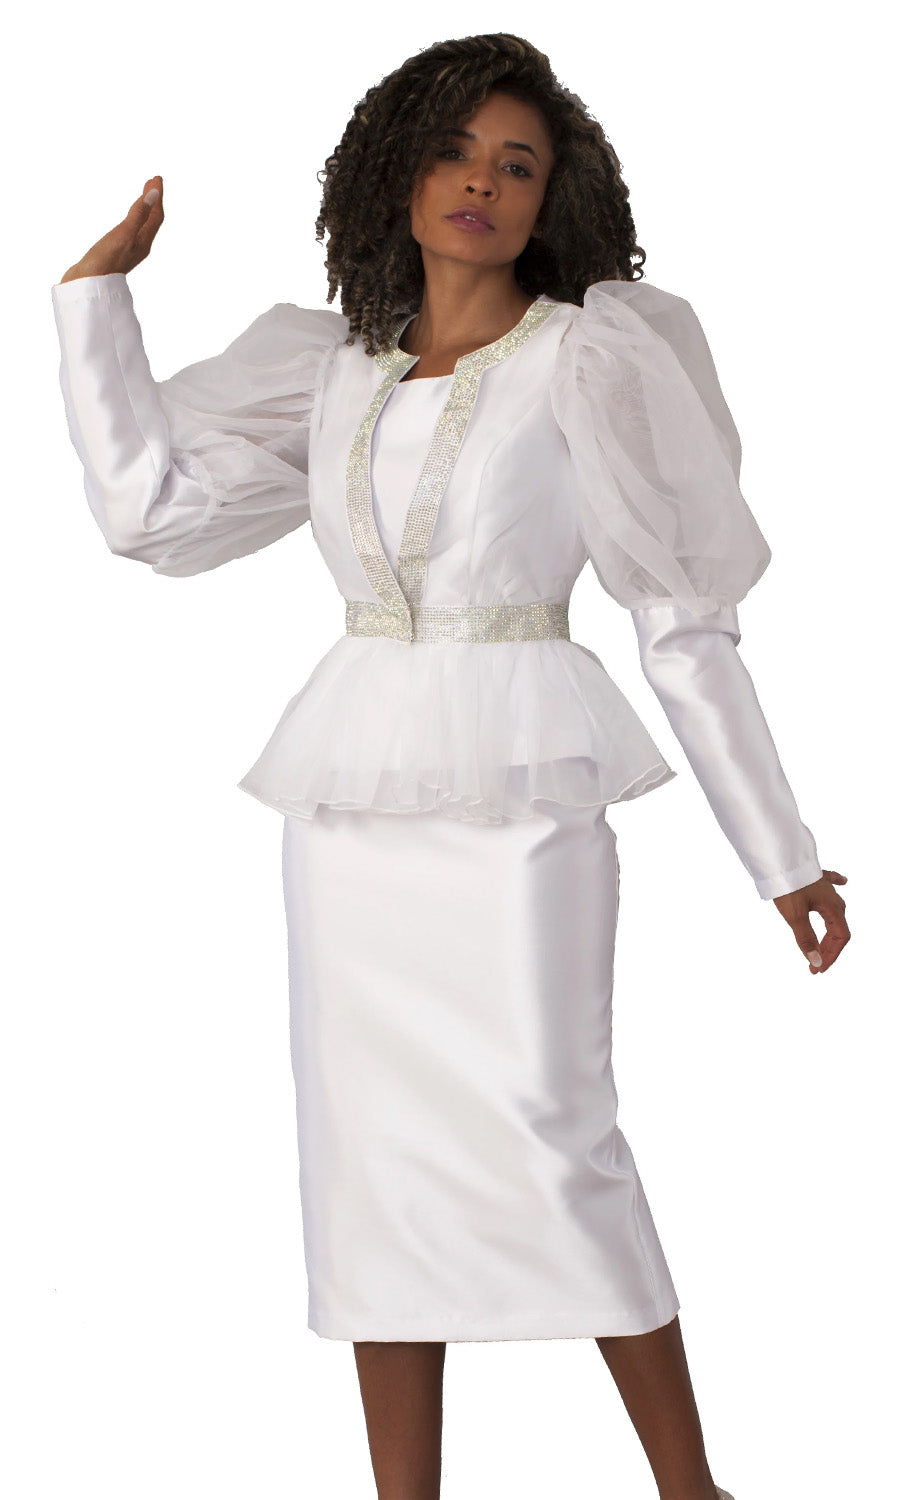 Tally Taylor Church Suit 4815-White - Church Suits For Less